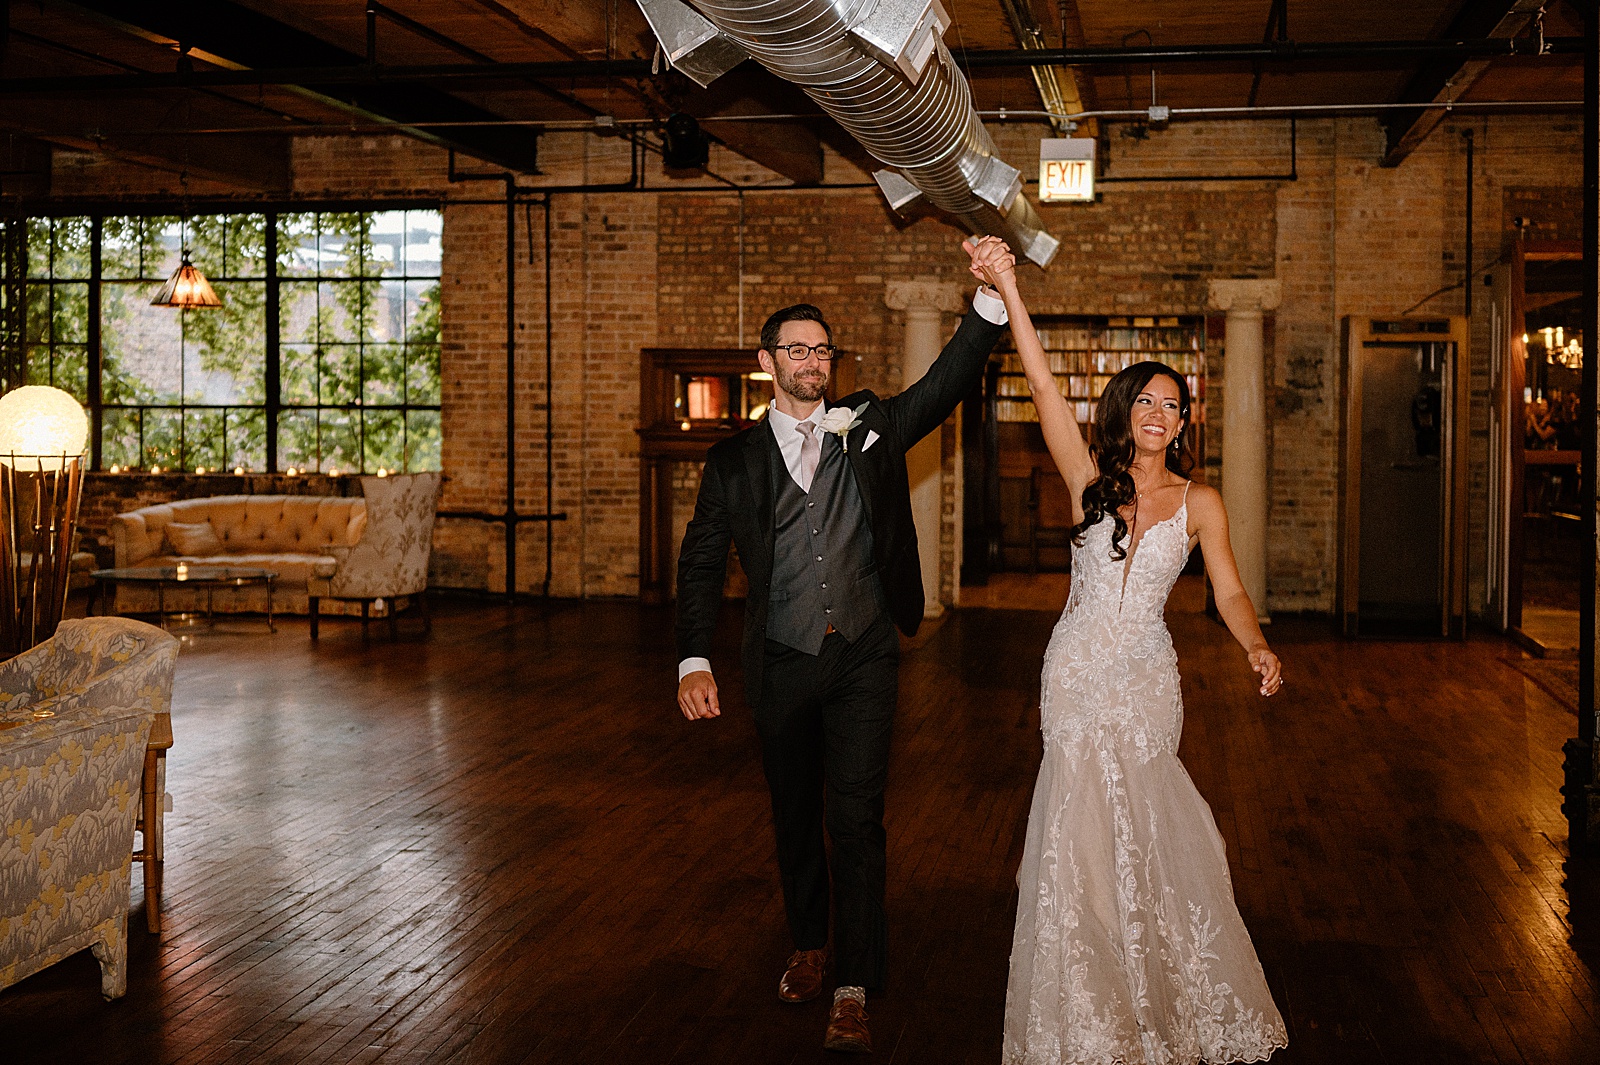 Newlyweds entering a wedding reception with their hands in the air